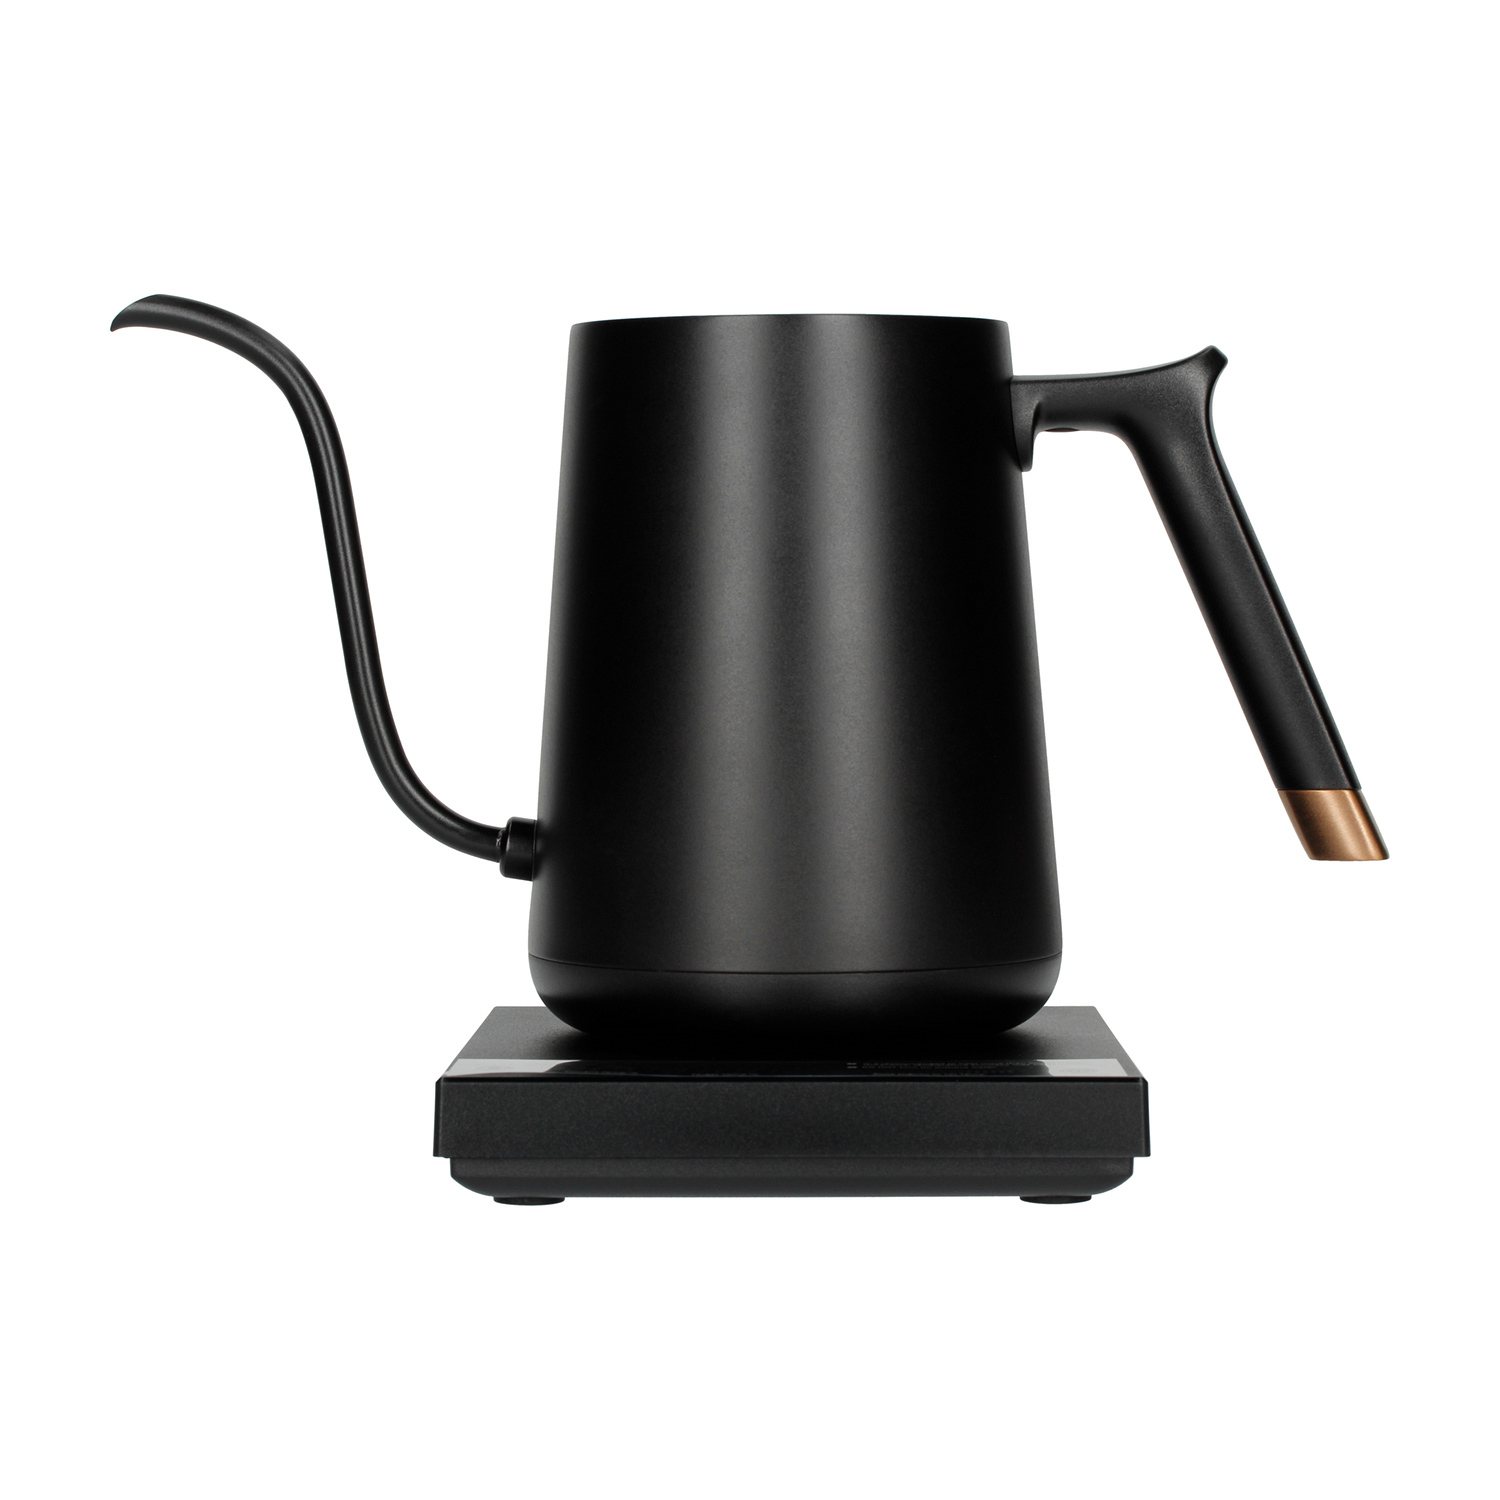 Timemore Pour Over Coffee Kettle – Kahve Lab